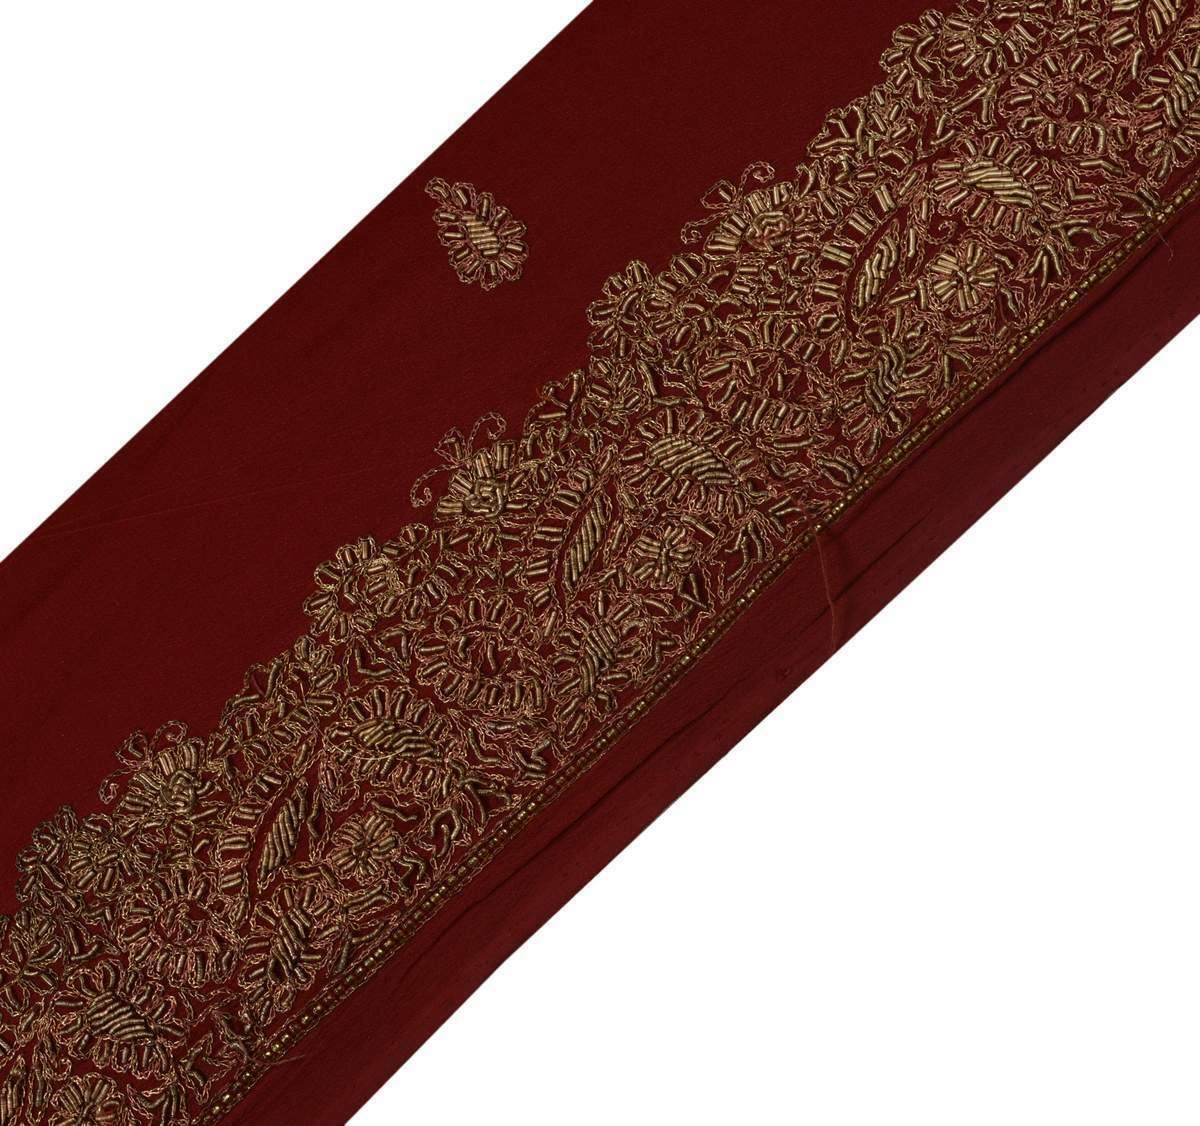 Vintage Sari Border Indian Craft Trim Hand Beaded Embroidered Maroon Lace Ribbon